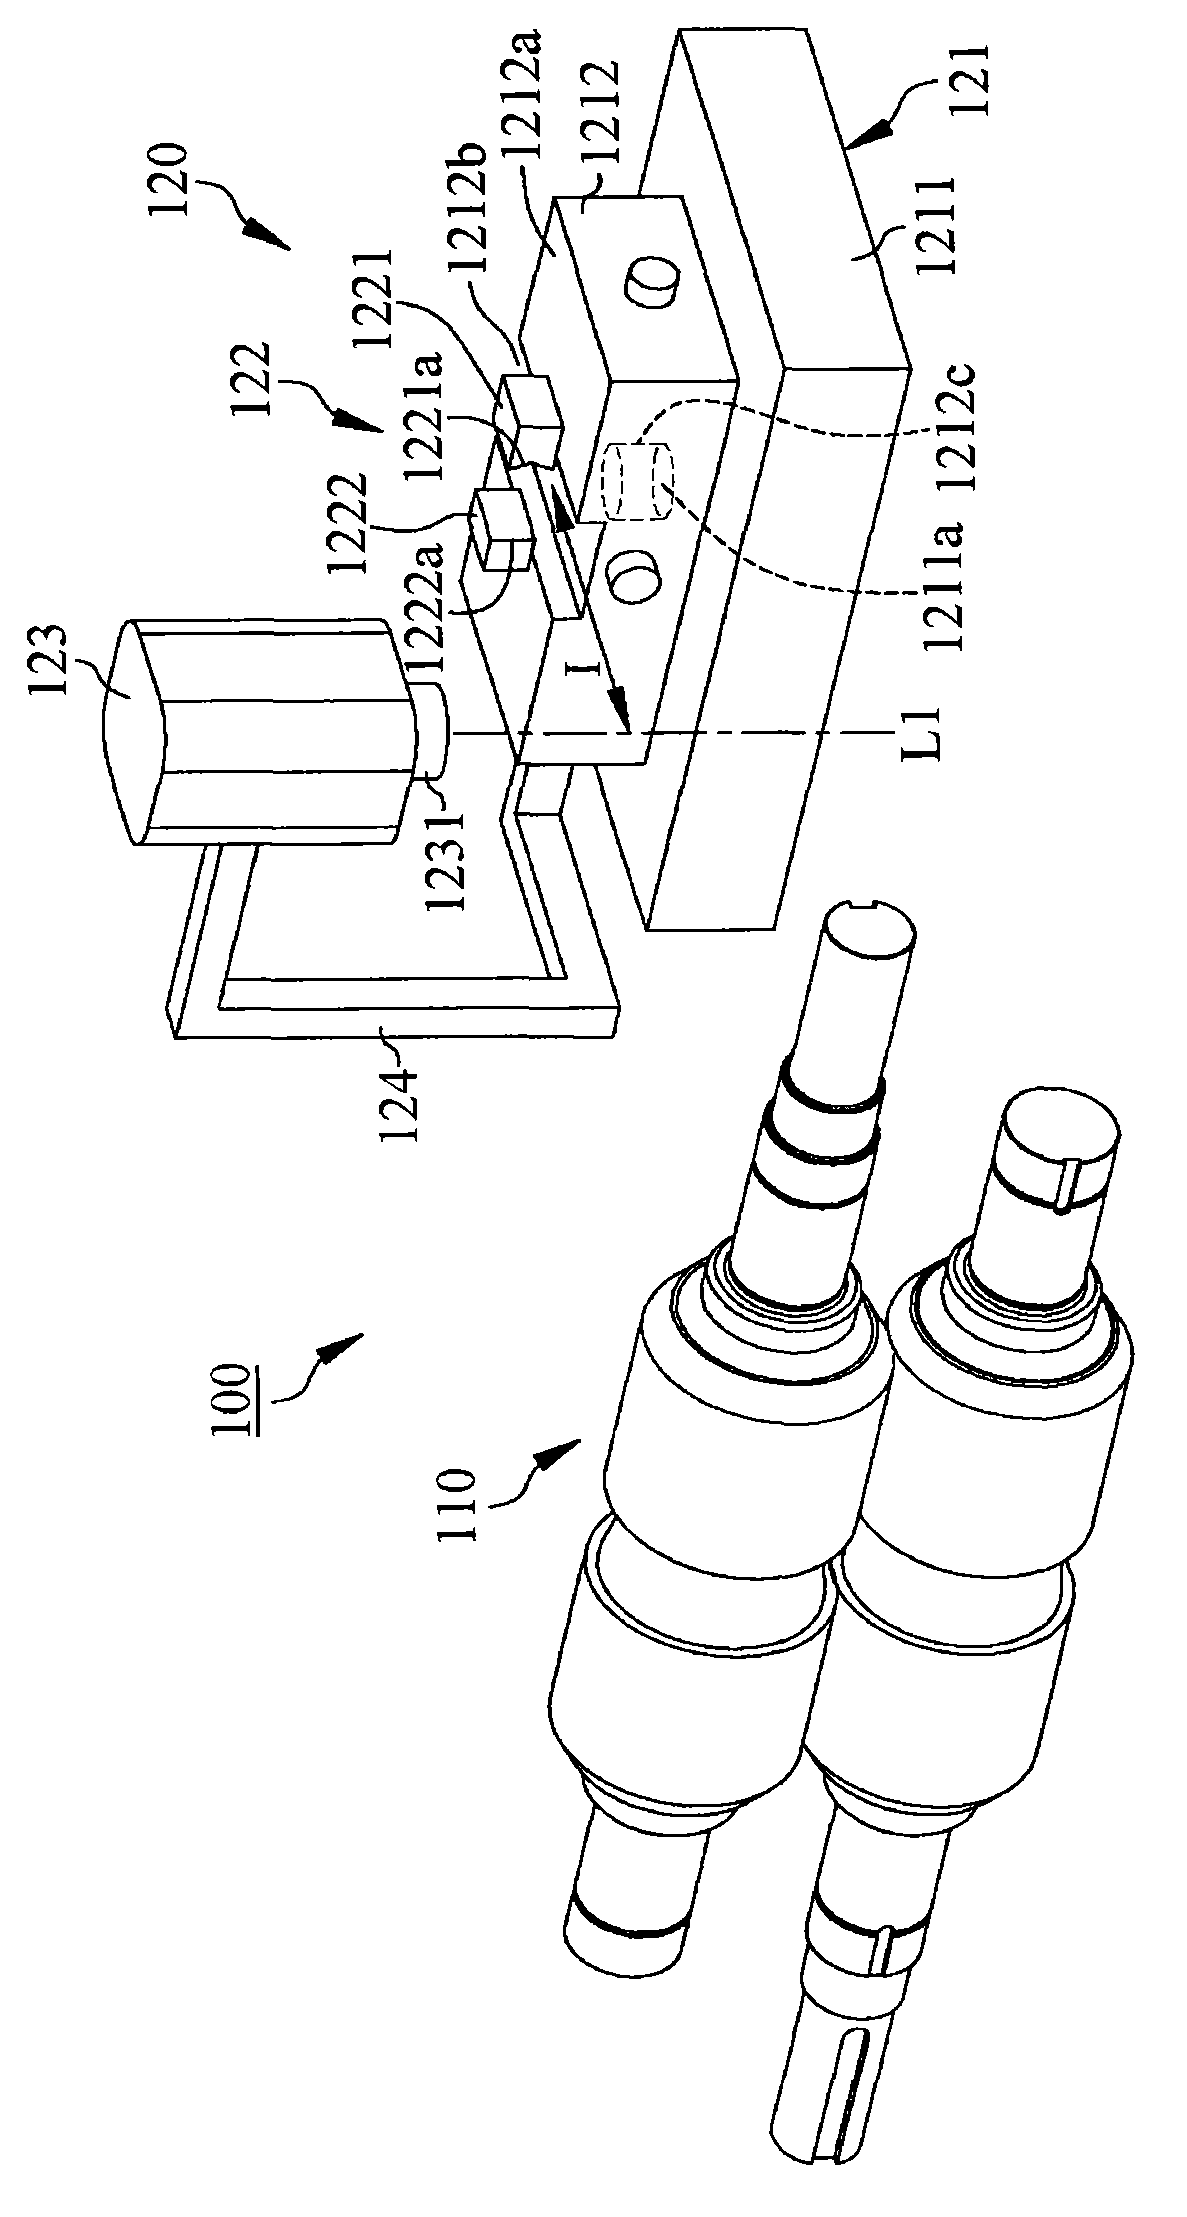 Molding mechanism for profile